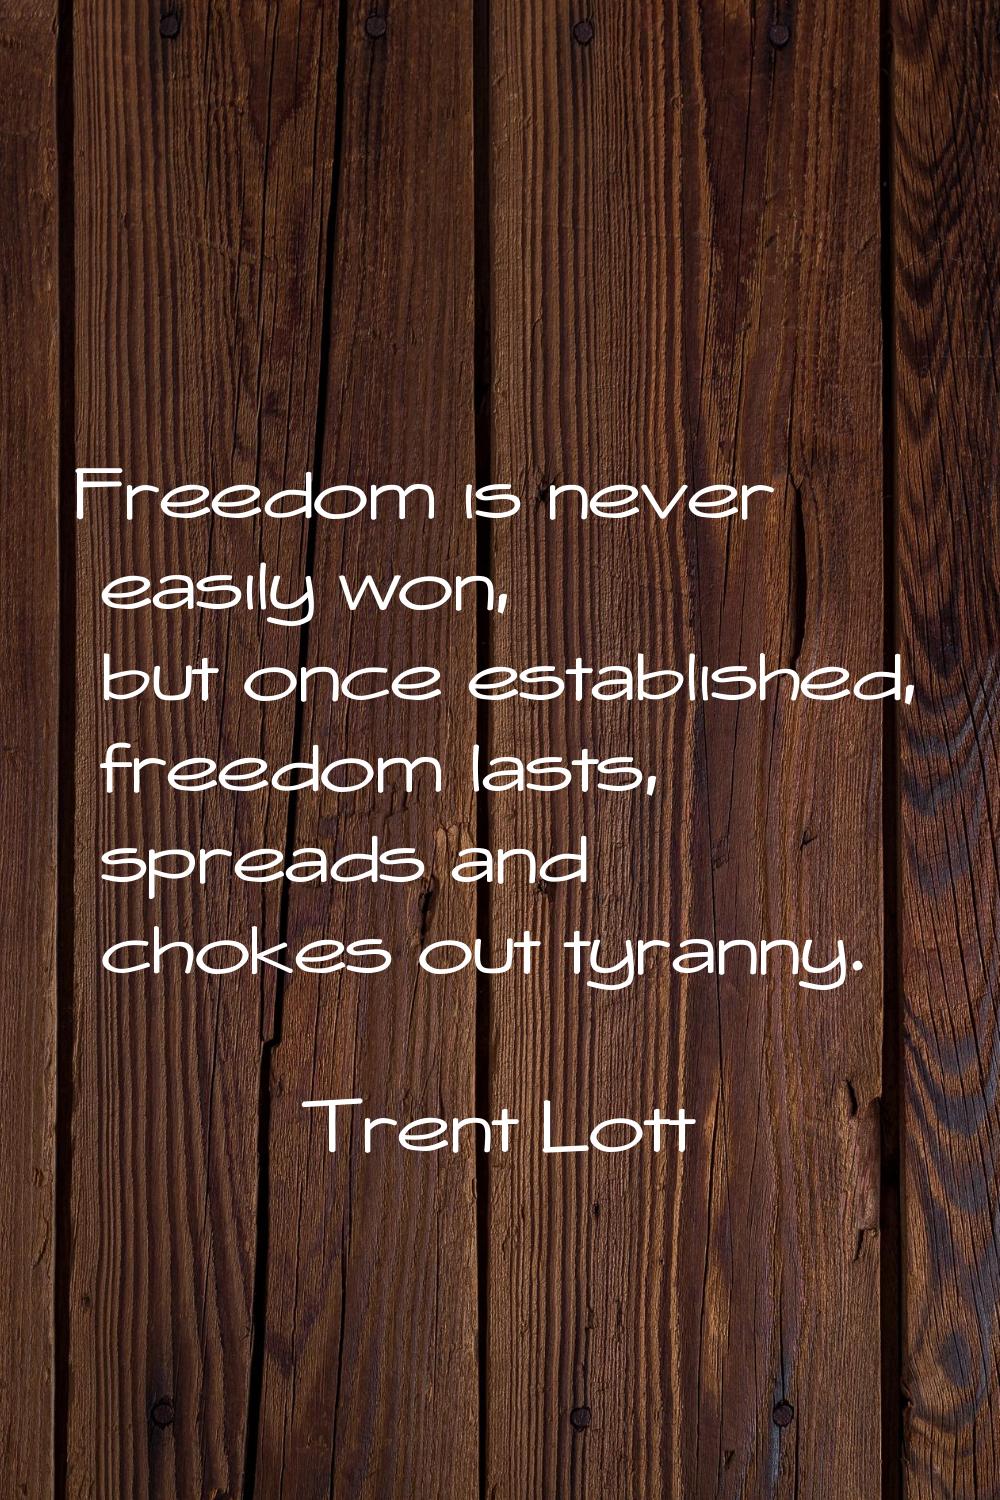 Freedom is never easily won, but once established, freedom lasts, spreads and chokes out tyranny.